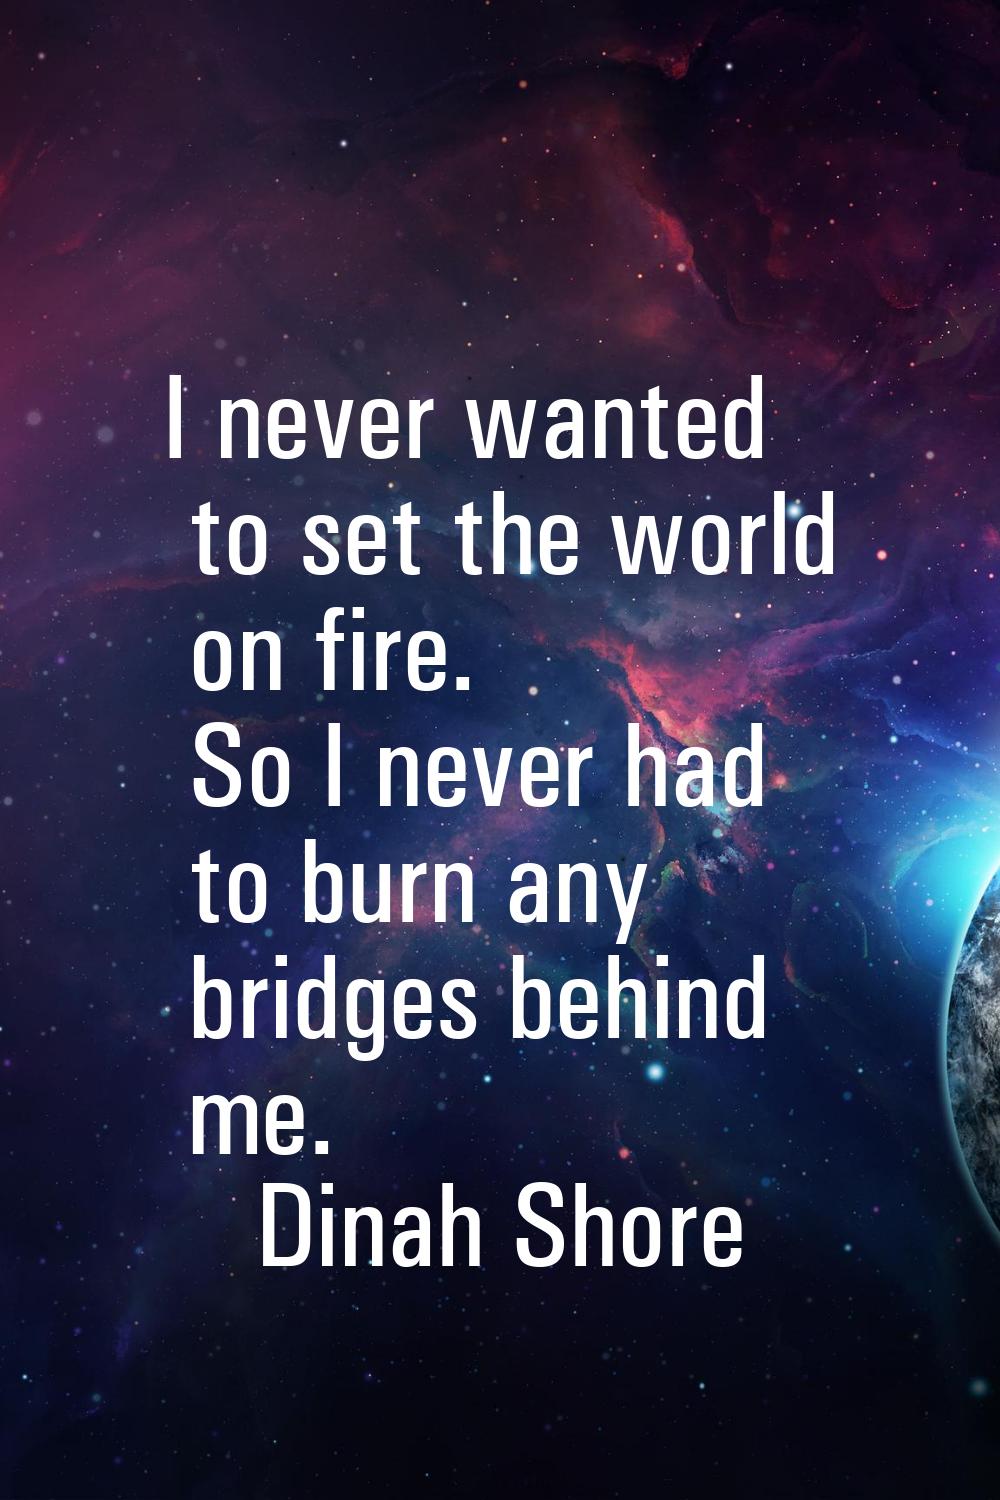 I never wanted to set the world on fire. So I never had to burn any bridges behind me.